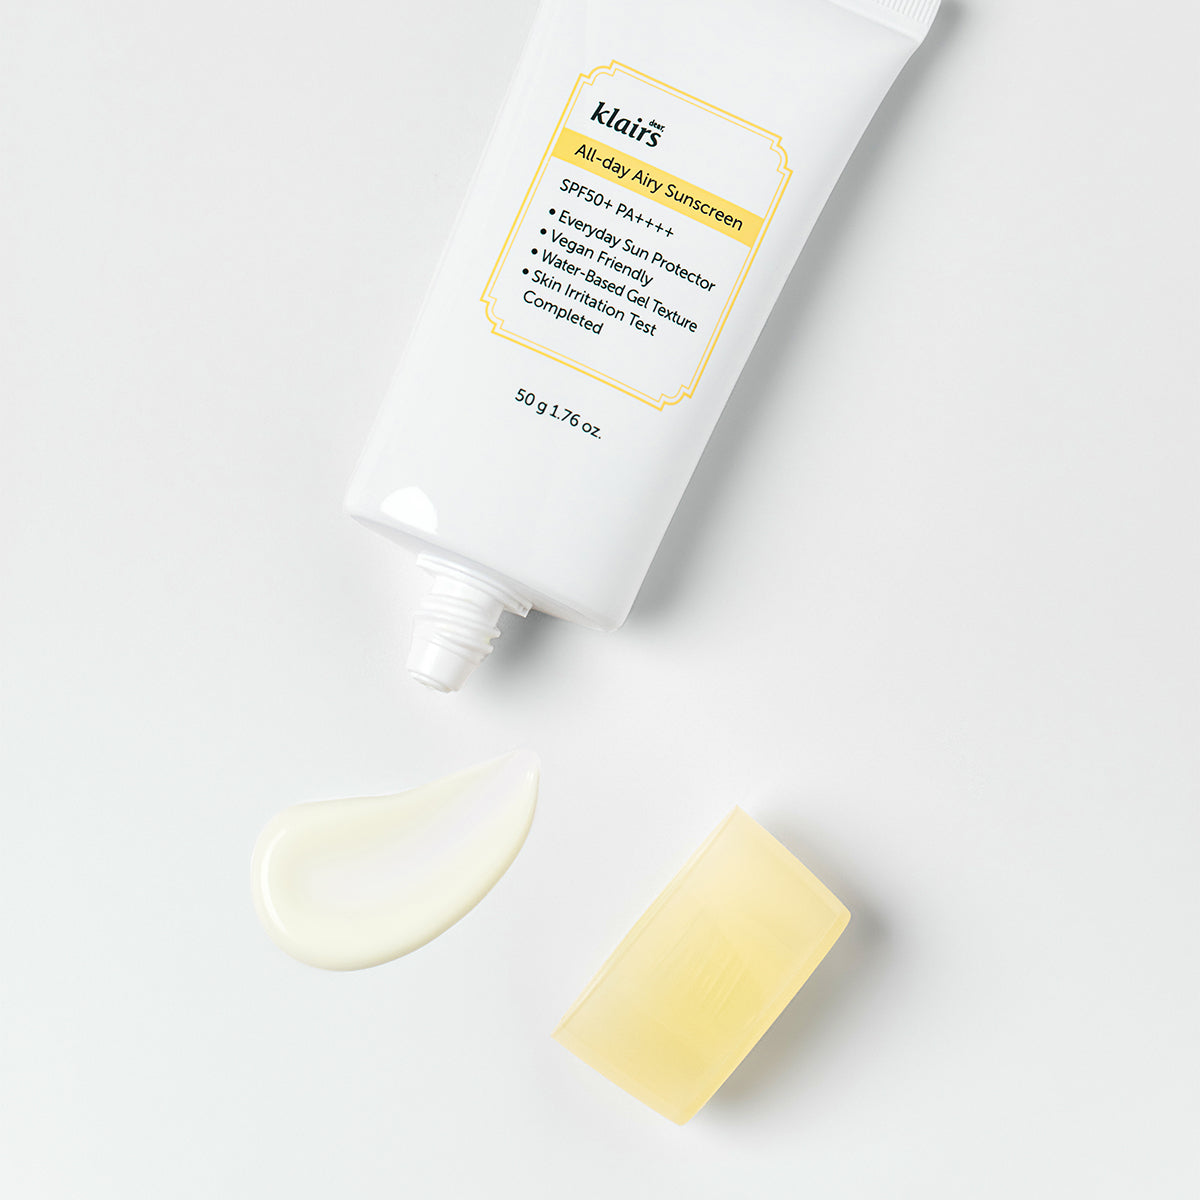 All-day Airy Sunscreen SPF50+ Broad Spectrum